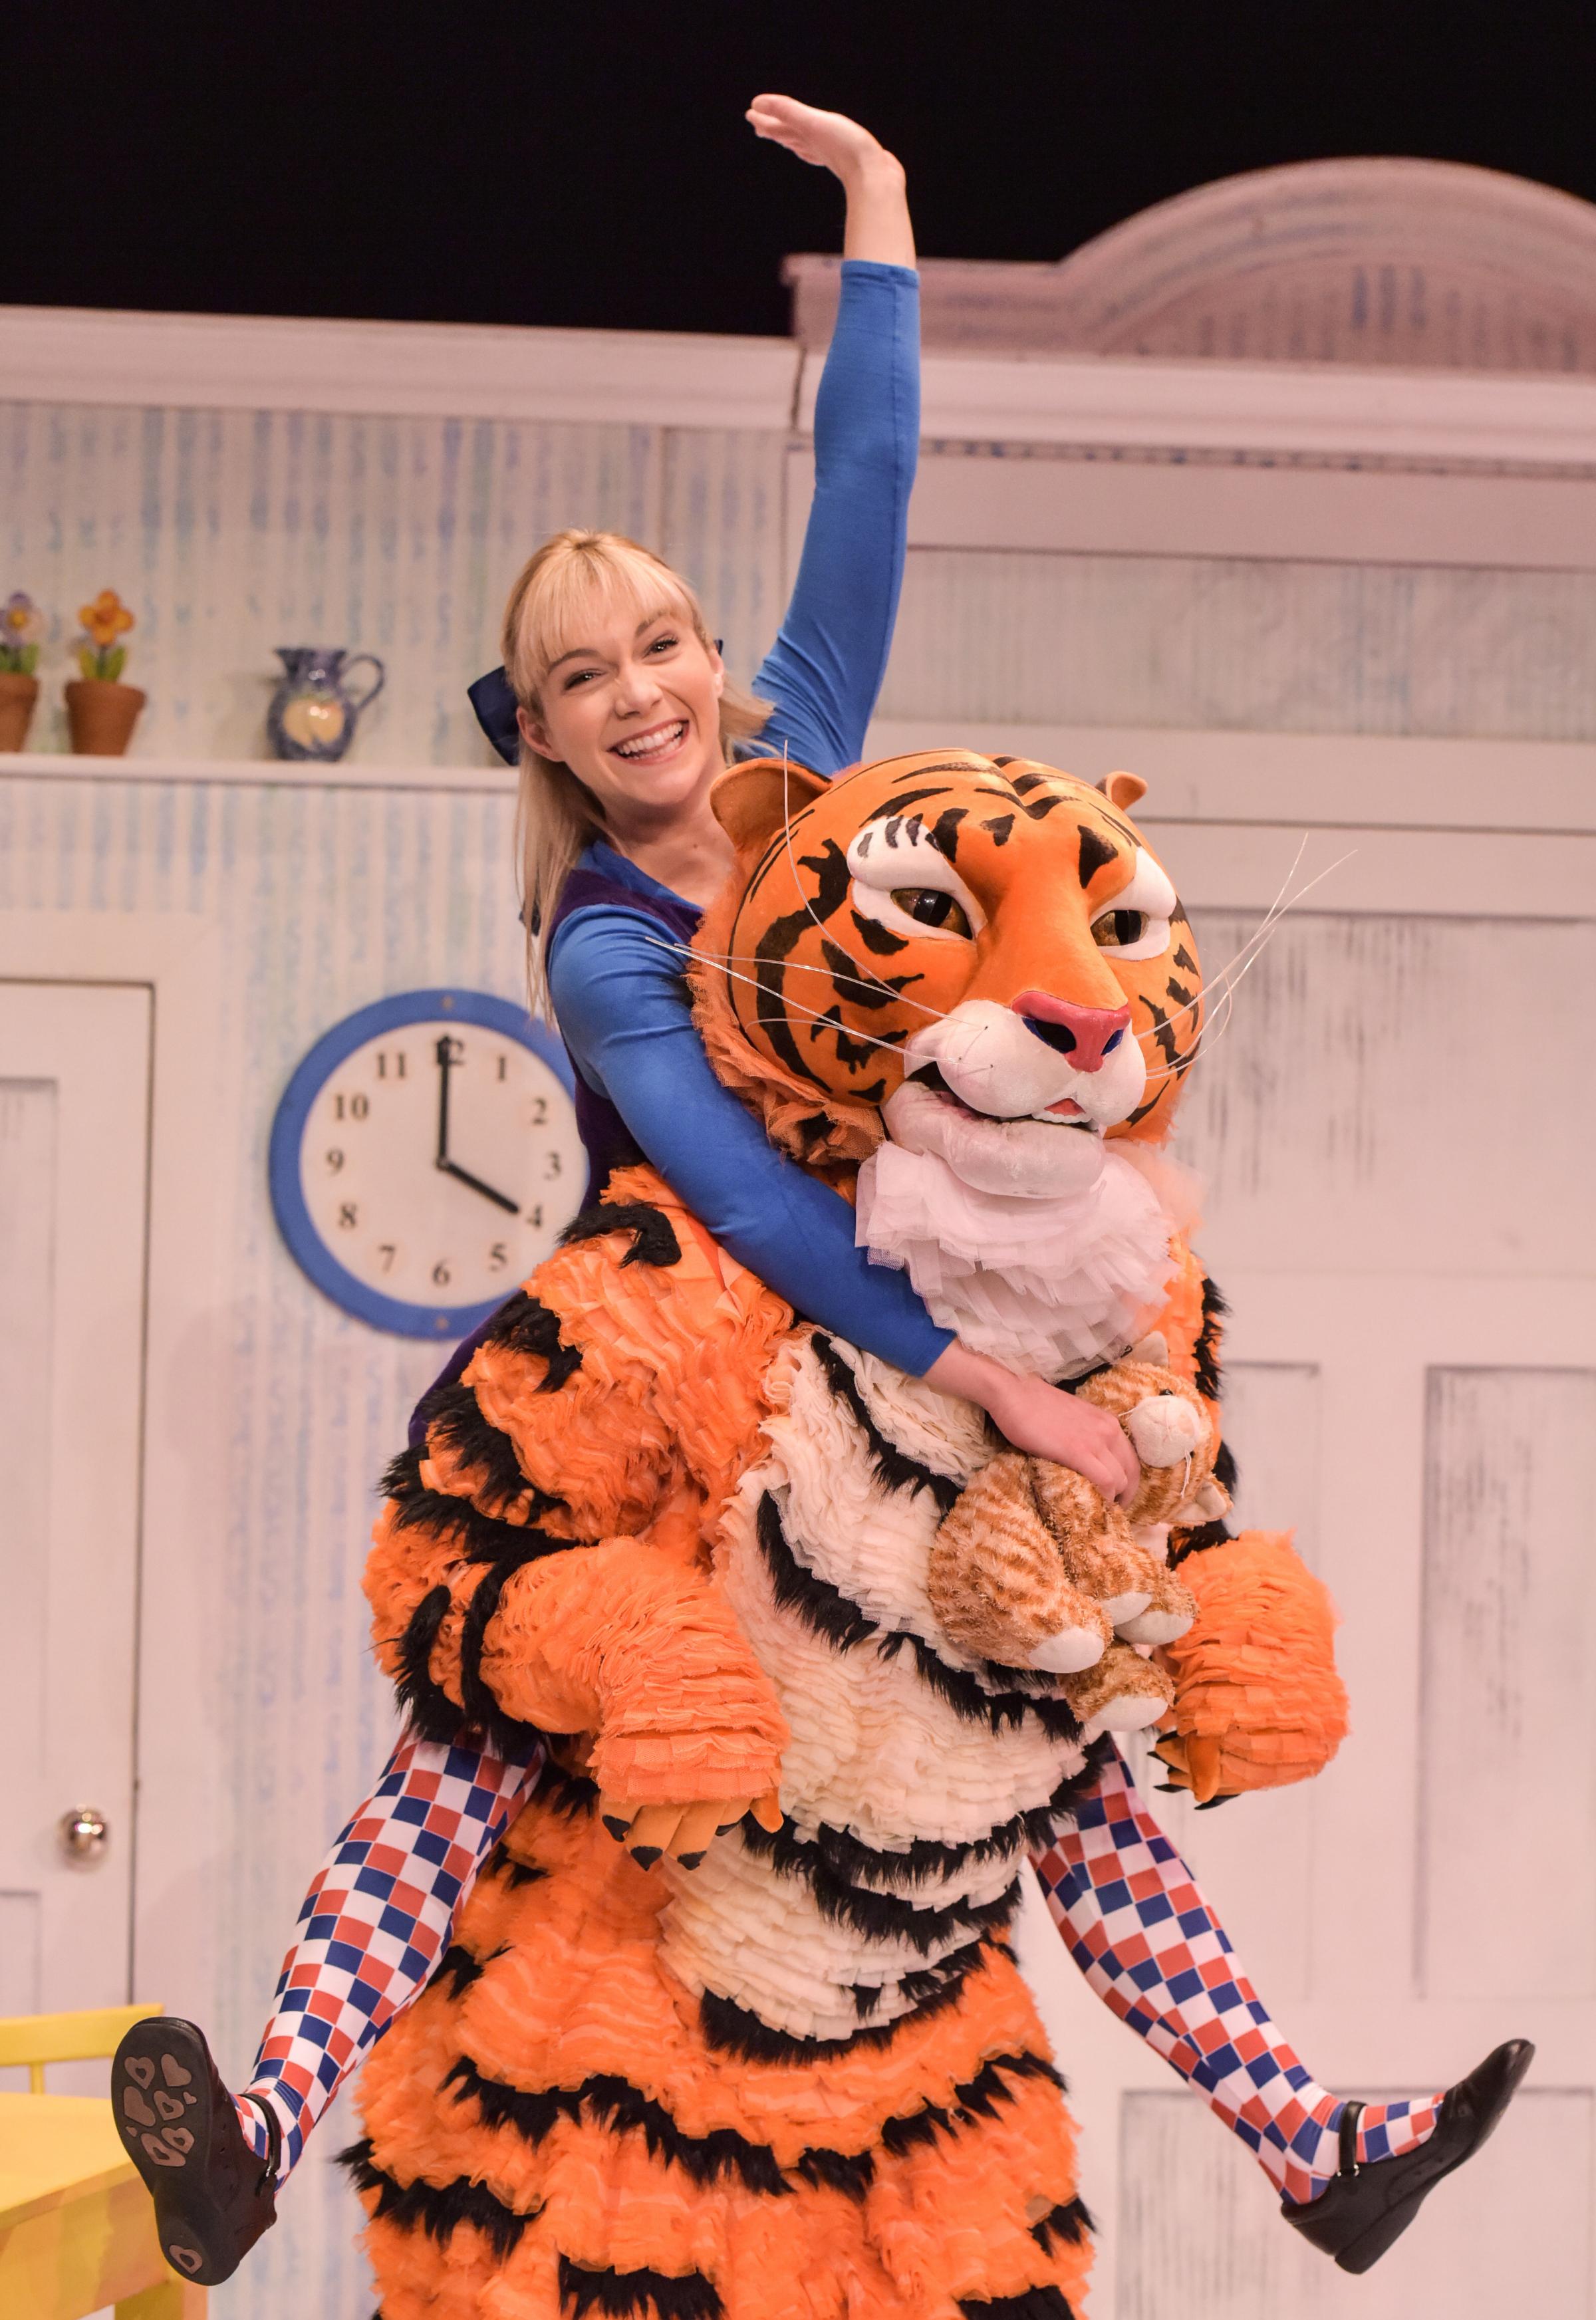 Win tickets for The Tiger Who Came To Tea